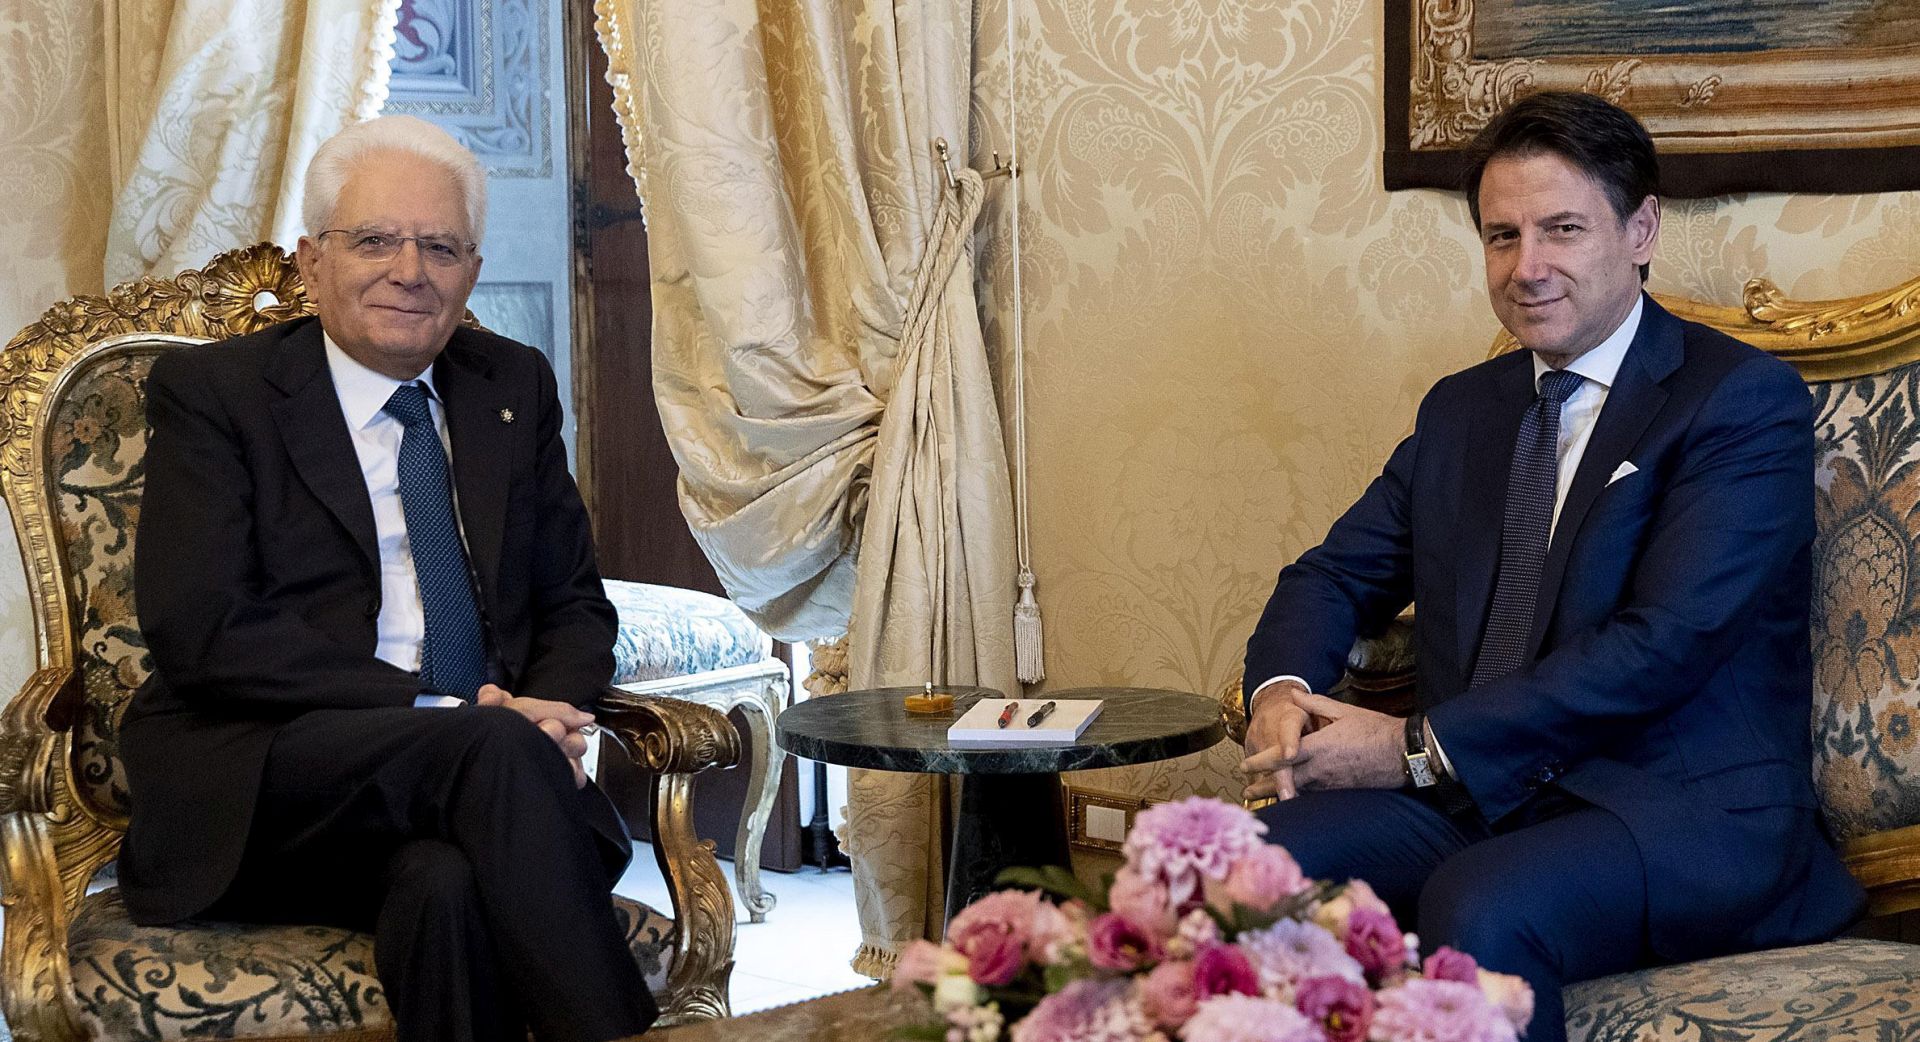 epa07800600 A handout photo made available by the Quirinal Press Office shows Italian Prime Minister Giuseppe Conte (R) and Italian President Sergio Mattarella (L) during their meeting at the Quirinal Palace in Rome, Italy, 29 August 2019. Outgoing premier Giusppe Conte is set to get a fresh mandate to try to form a new government majority with the anti-establishment 5-Star Movement (M5S) and the centre-left Democratic Party (PD) replacing the M5S-League administration which nationalist League leader Matteo Salvini brought down earlier this month.  EPA/PAOLO GIANDOTTI / QUIRINAL PRESS OFFICE / HANDOUT  HANDOUT EDITORIAL USE ONLY/NO SALES